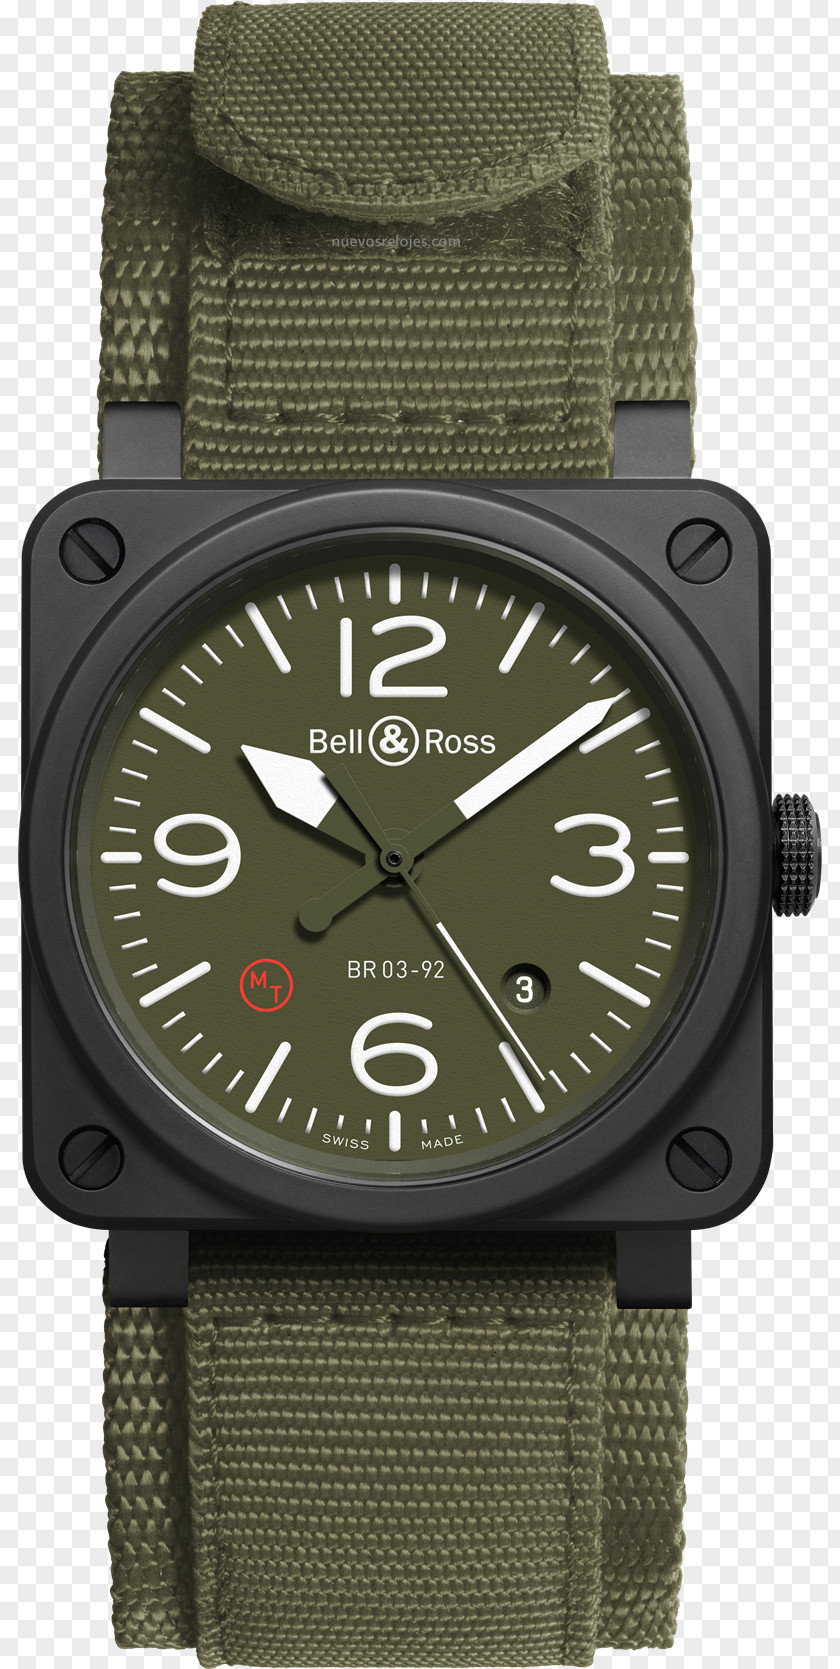 Watch Bell & Ross, Inc. Automatic Swiss Made PNG